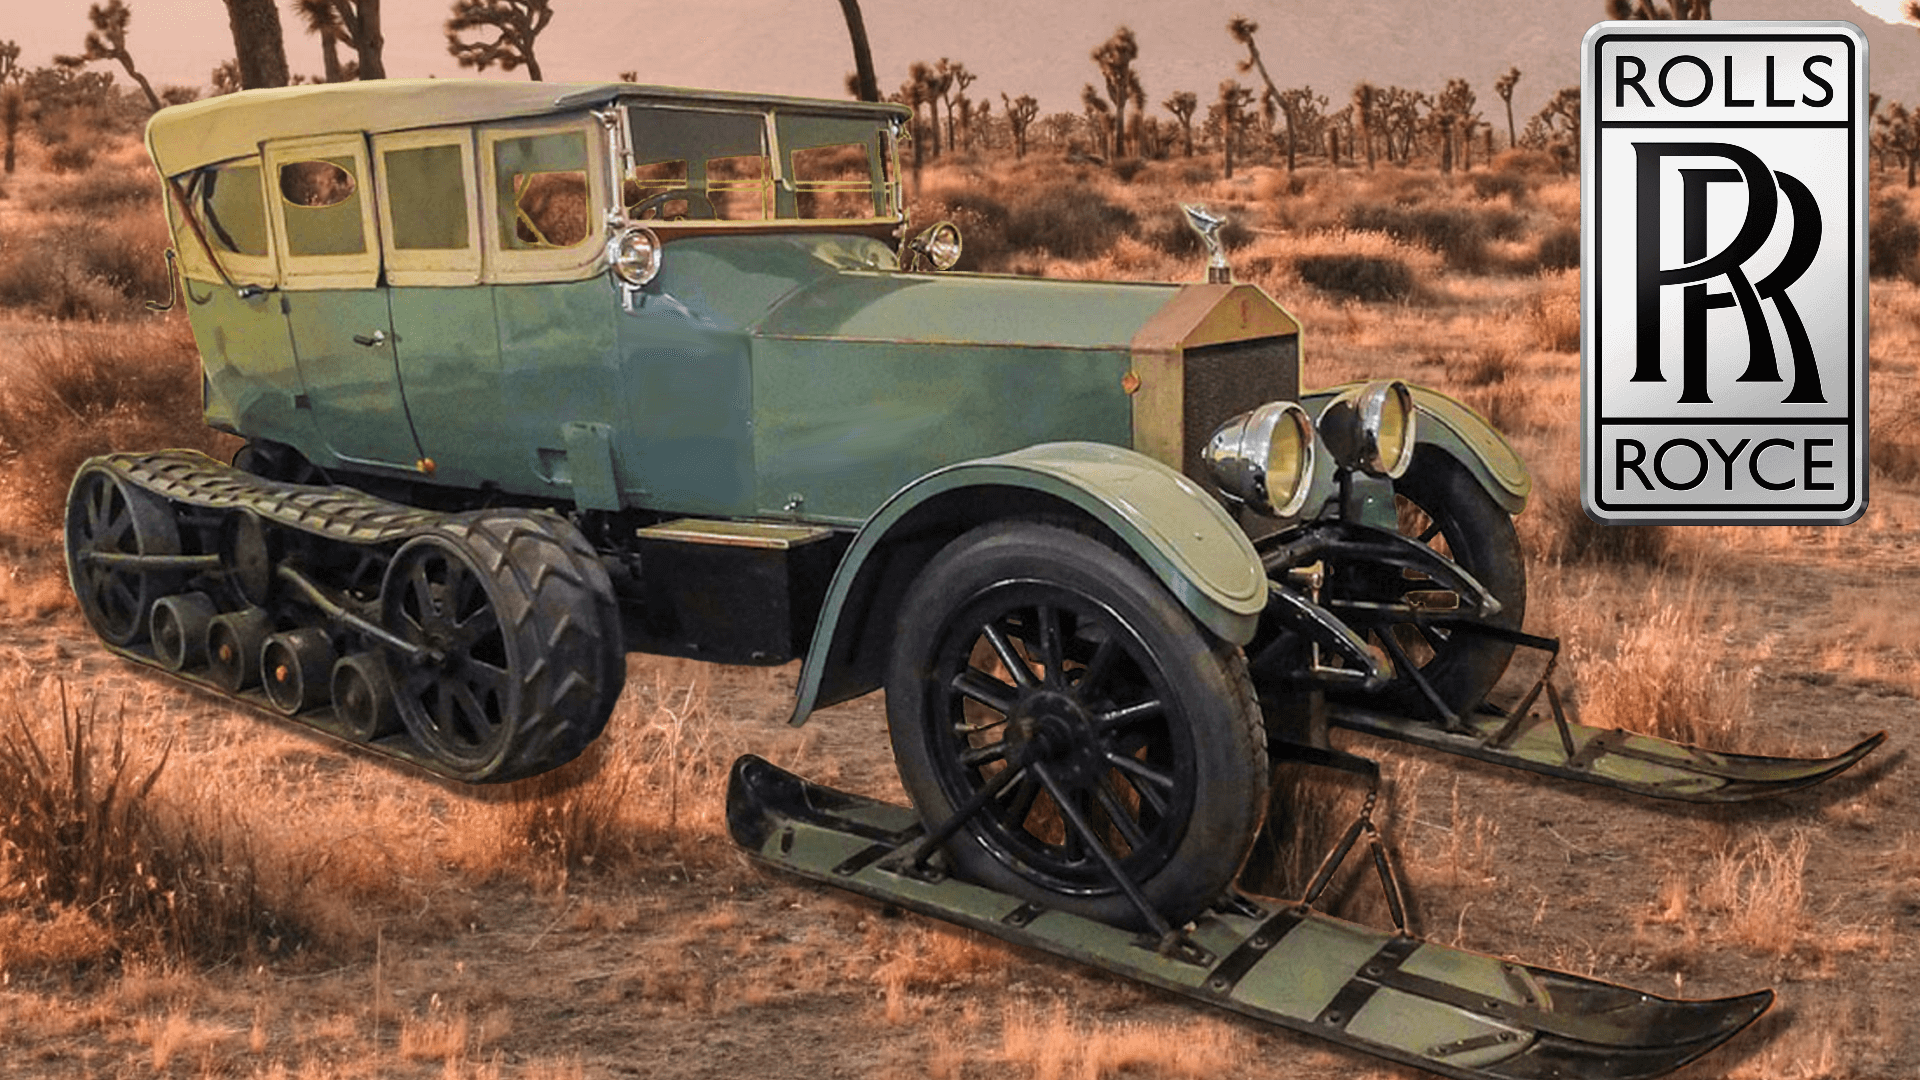 Every Rolls Royce From 1904 To Present Day – Part 1 of 4 (Pre-War)